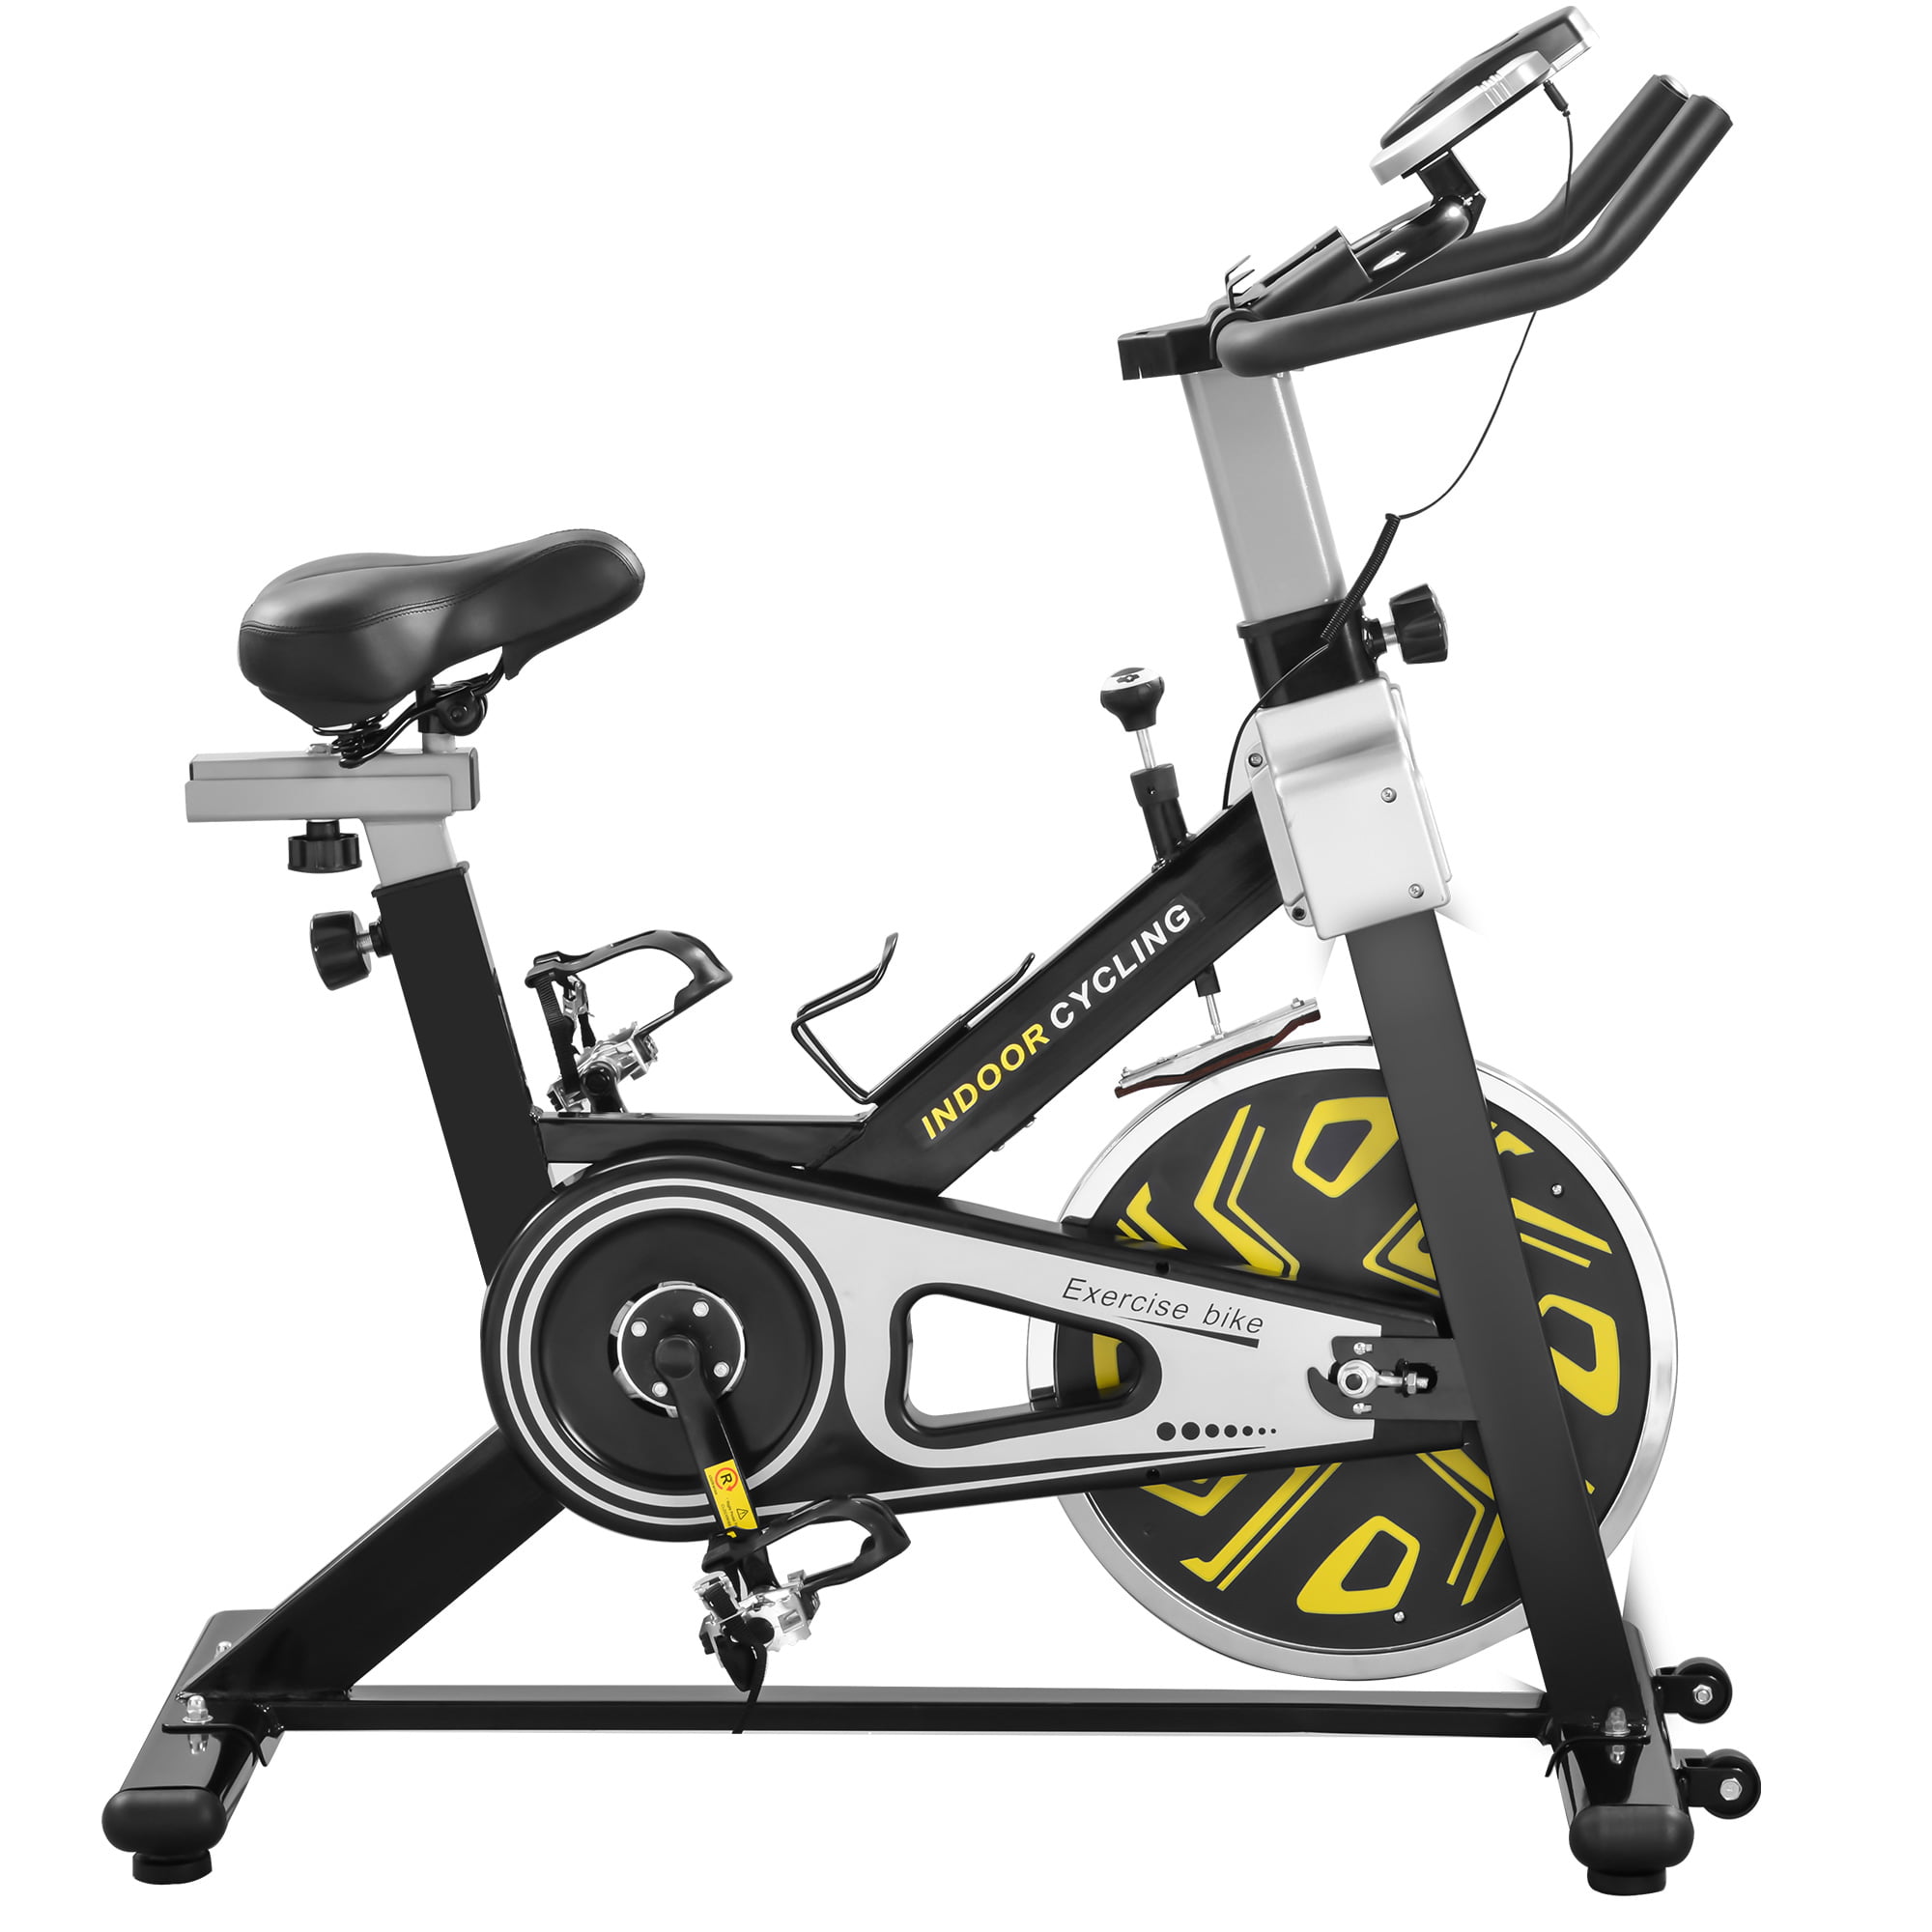 Details about   Indoor Exercise Bike Stationary Bicycle Cycling Home Cardio Workout Gym Training 